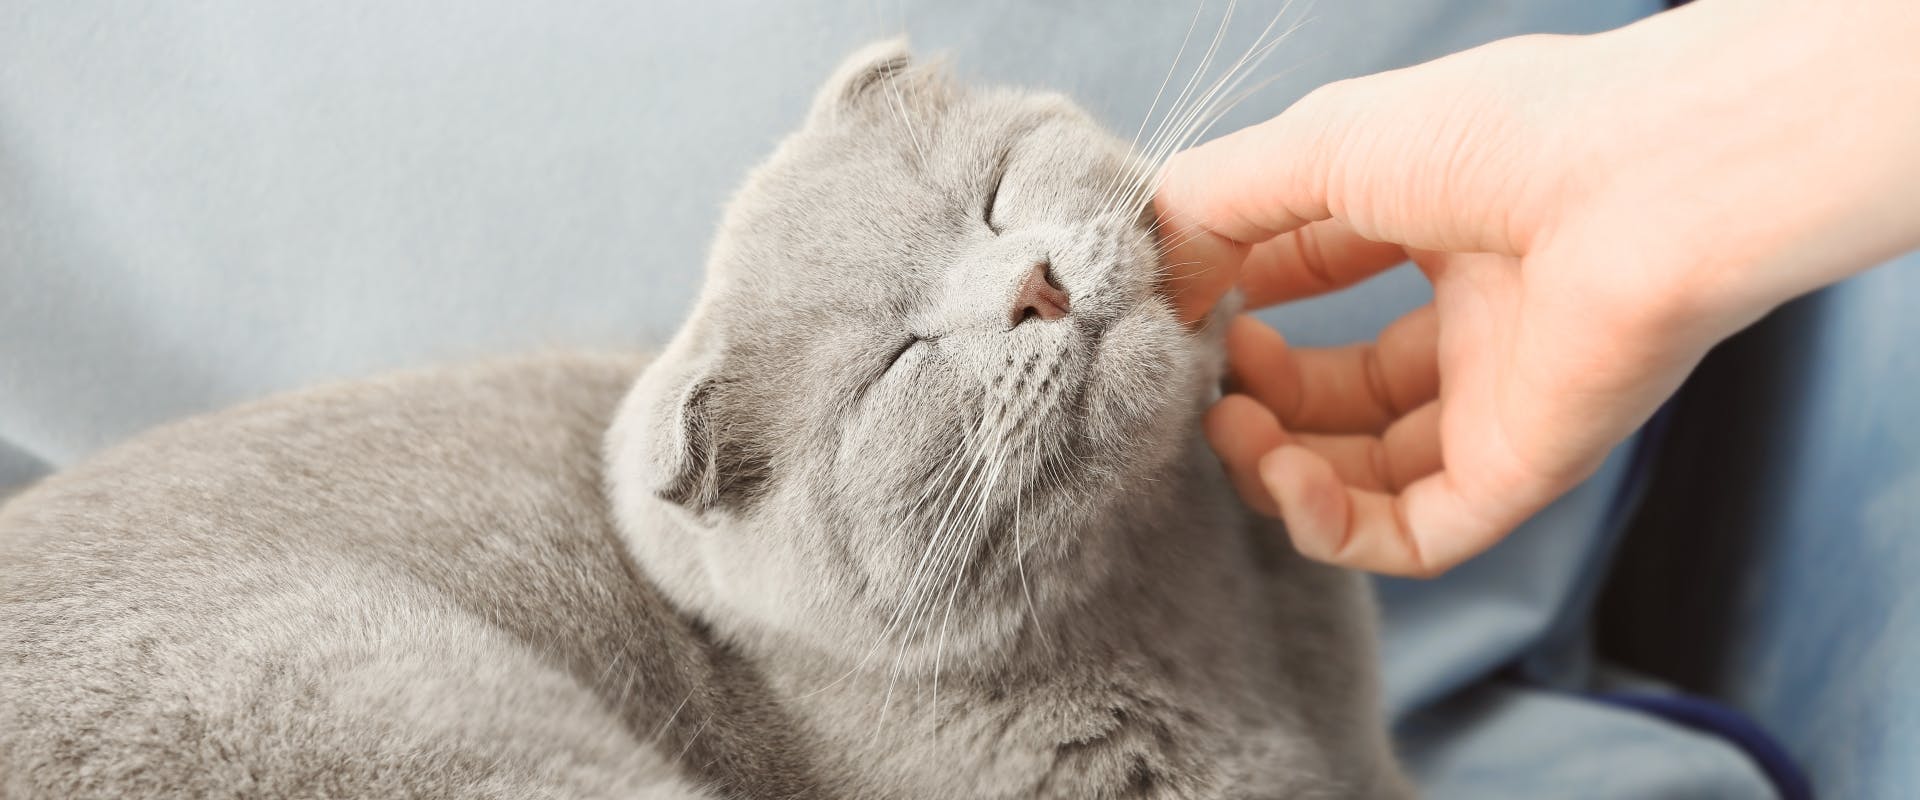 gray scottish fold cat being stroked under its chin